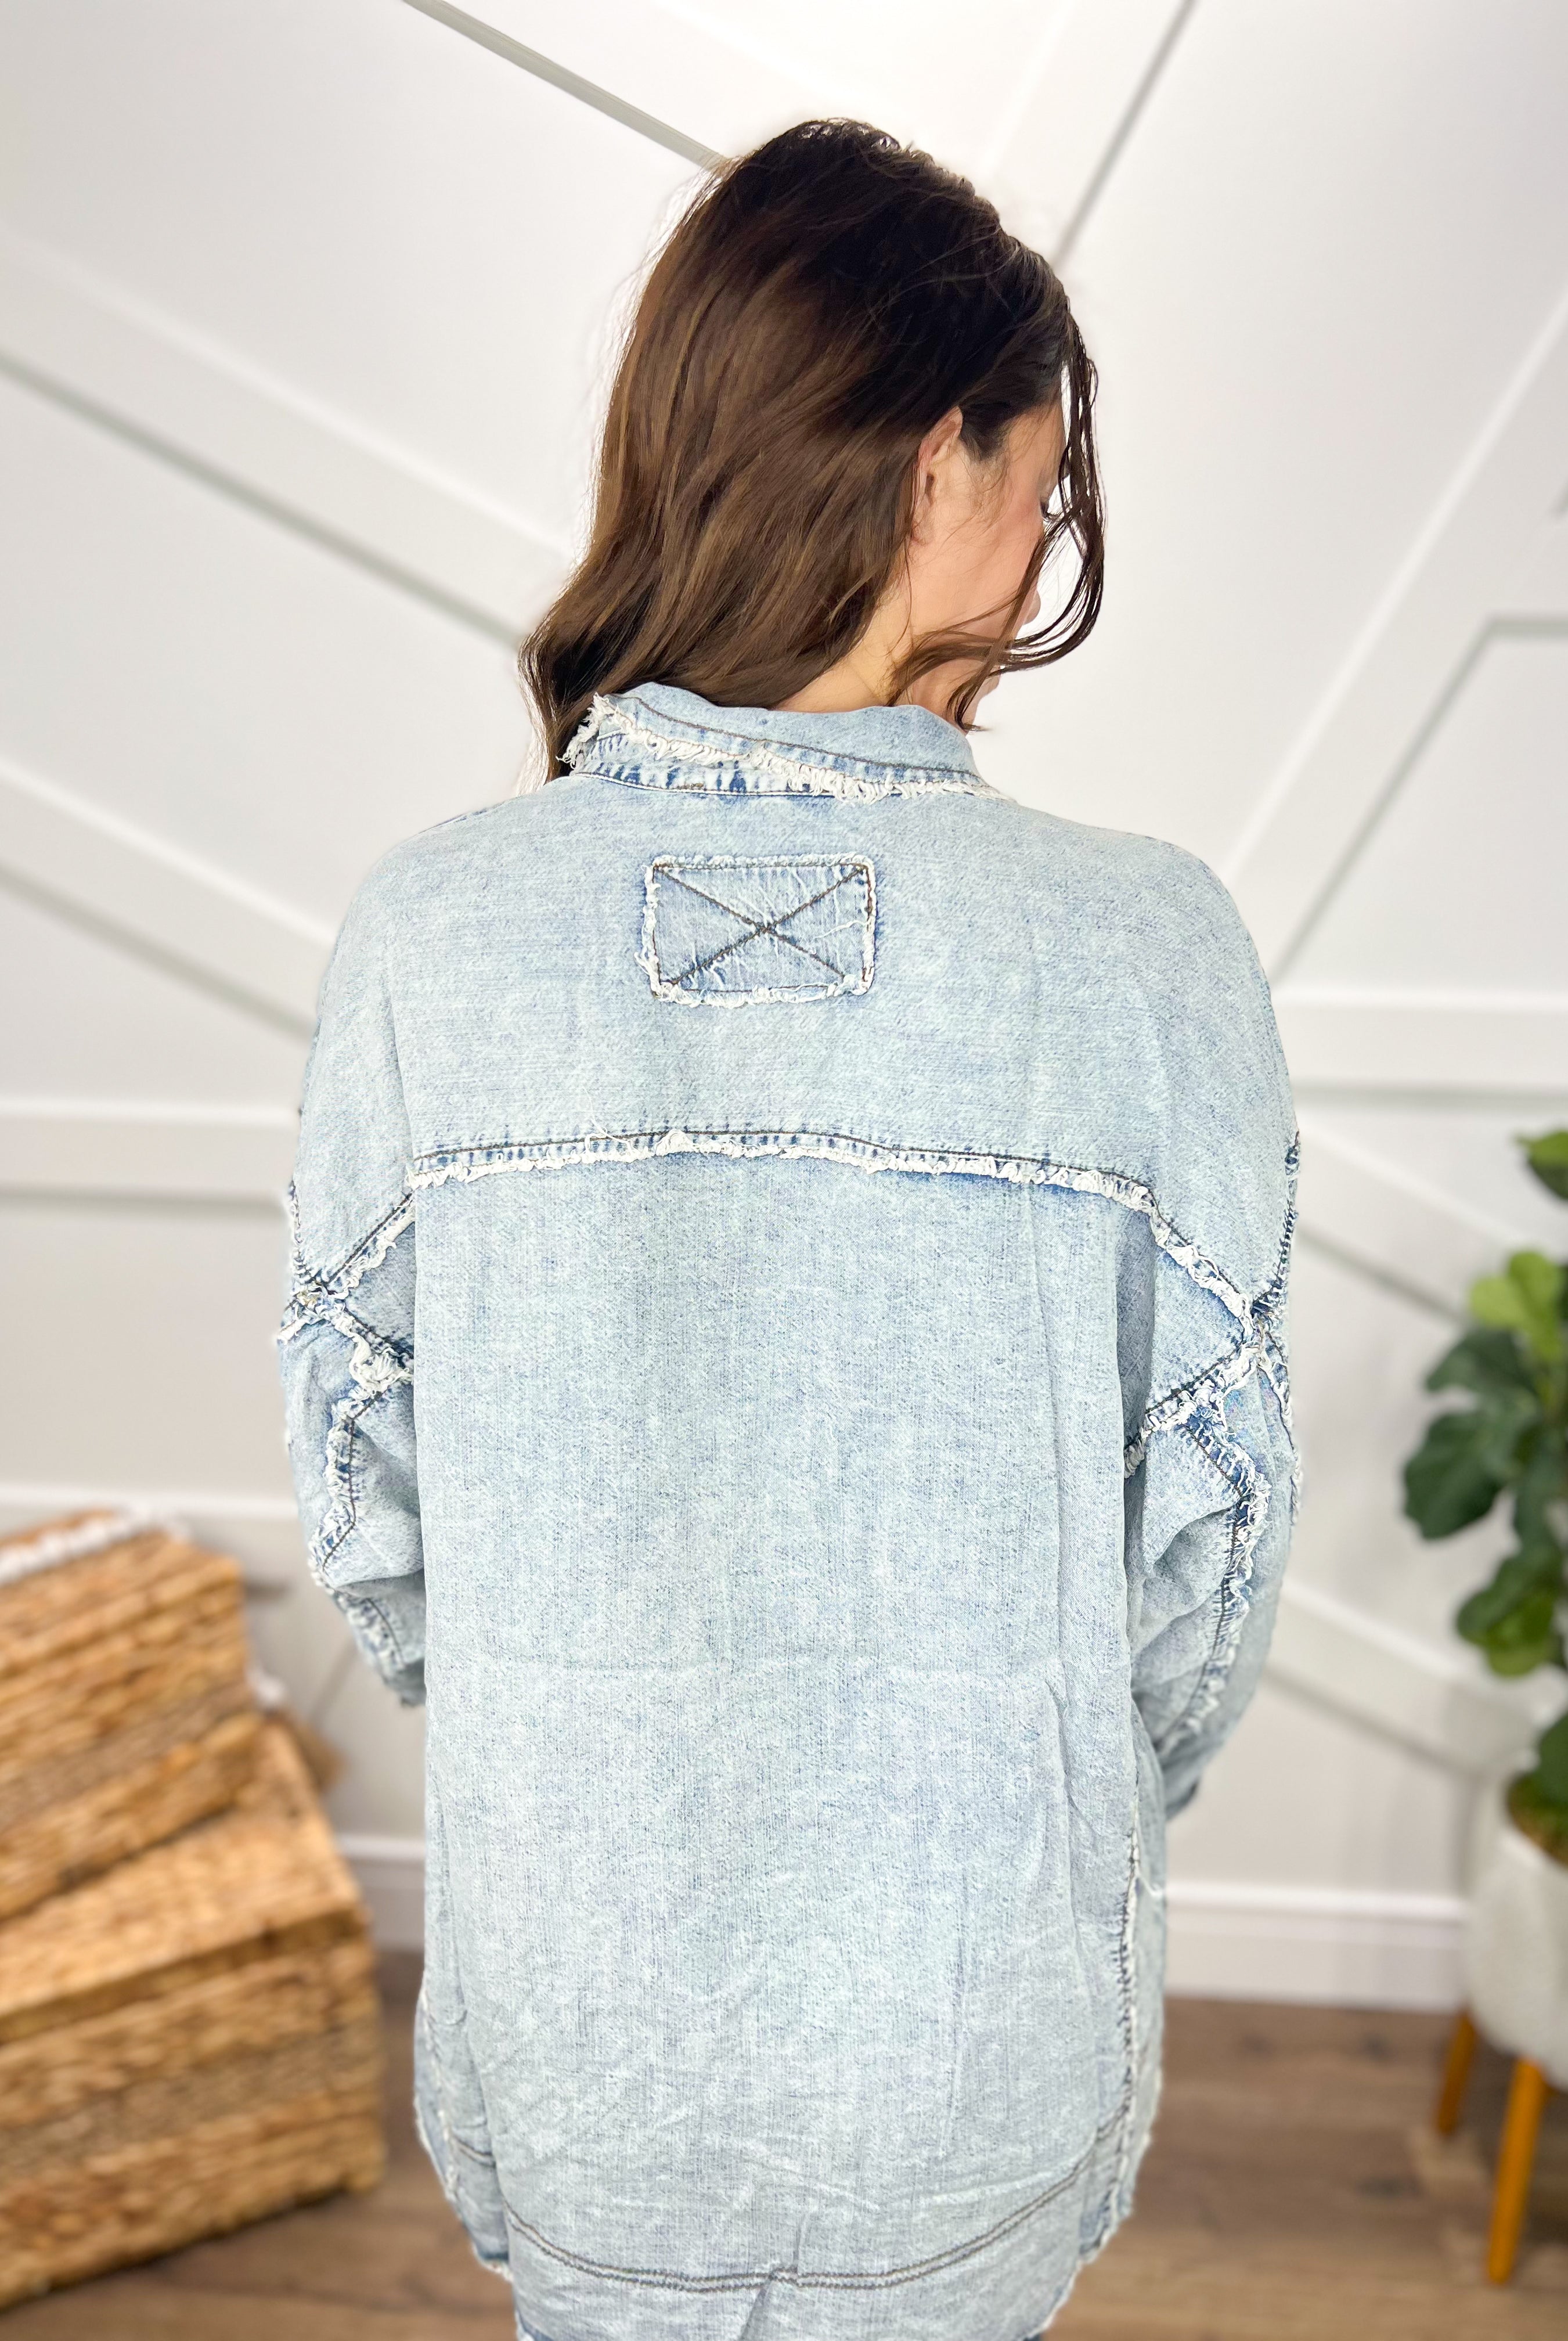 RESTOCK:Cool Factor Denim Top-120 Long Sleeve Tops-BlueVelvet-Heathered Boho Boutique, Women's Fashion and Accessories in Palmetto, FL